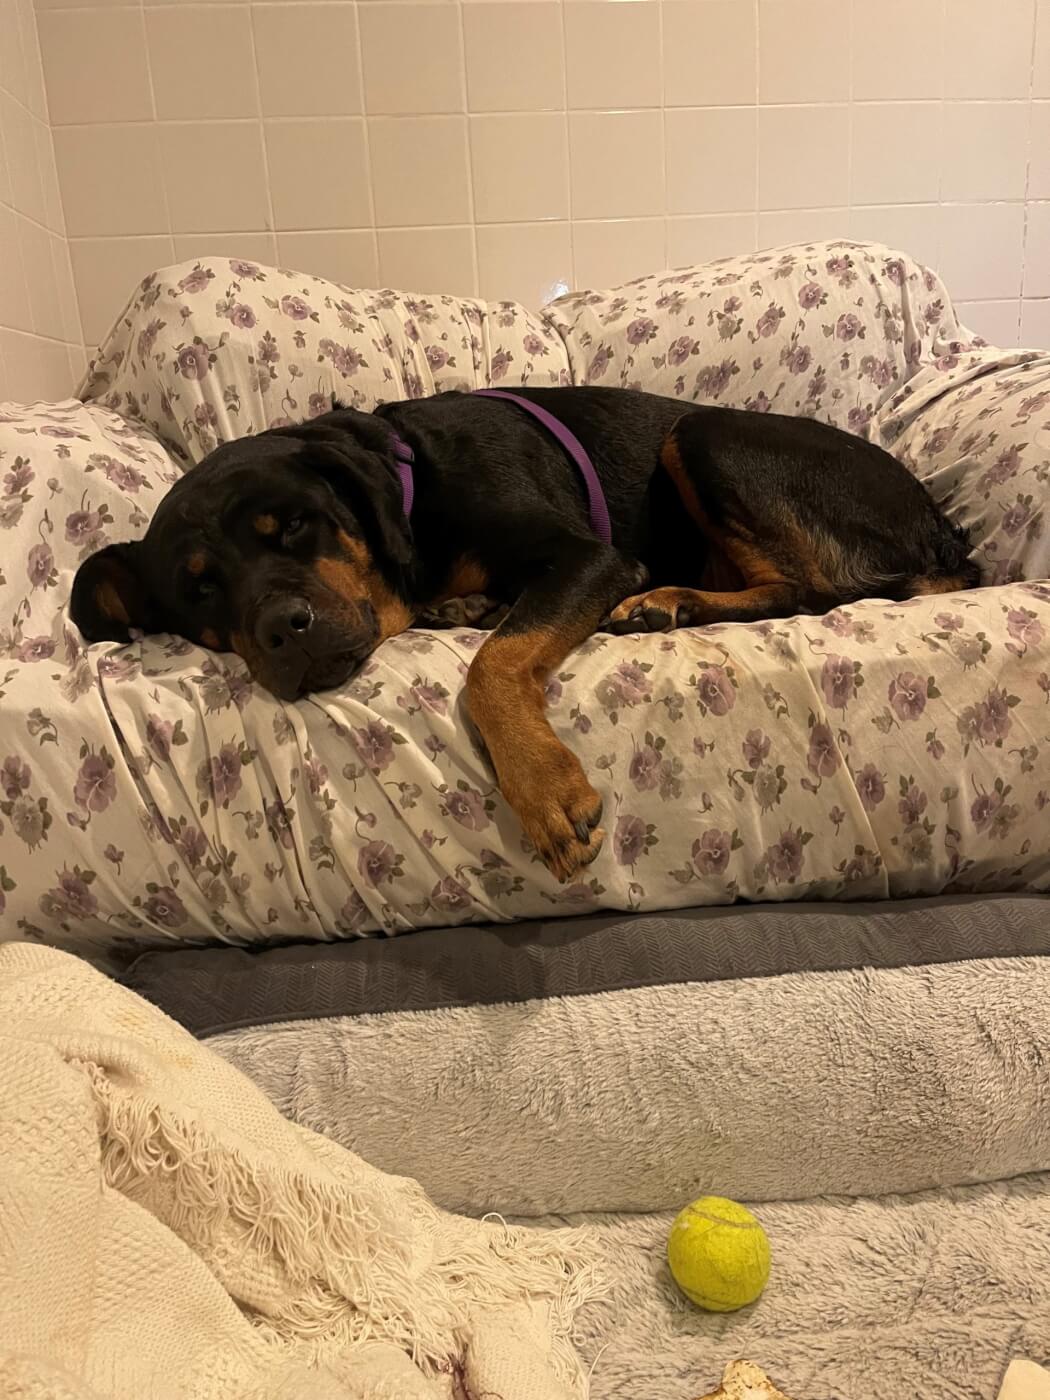 Lucy the Rottweiler rests on a dog bed and appears sleepy